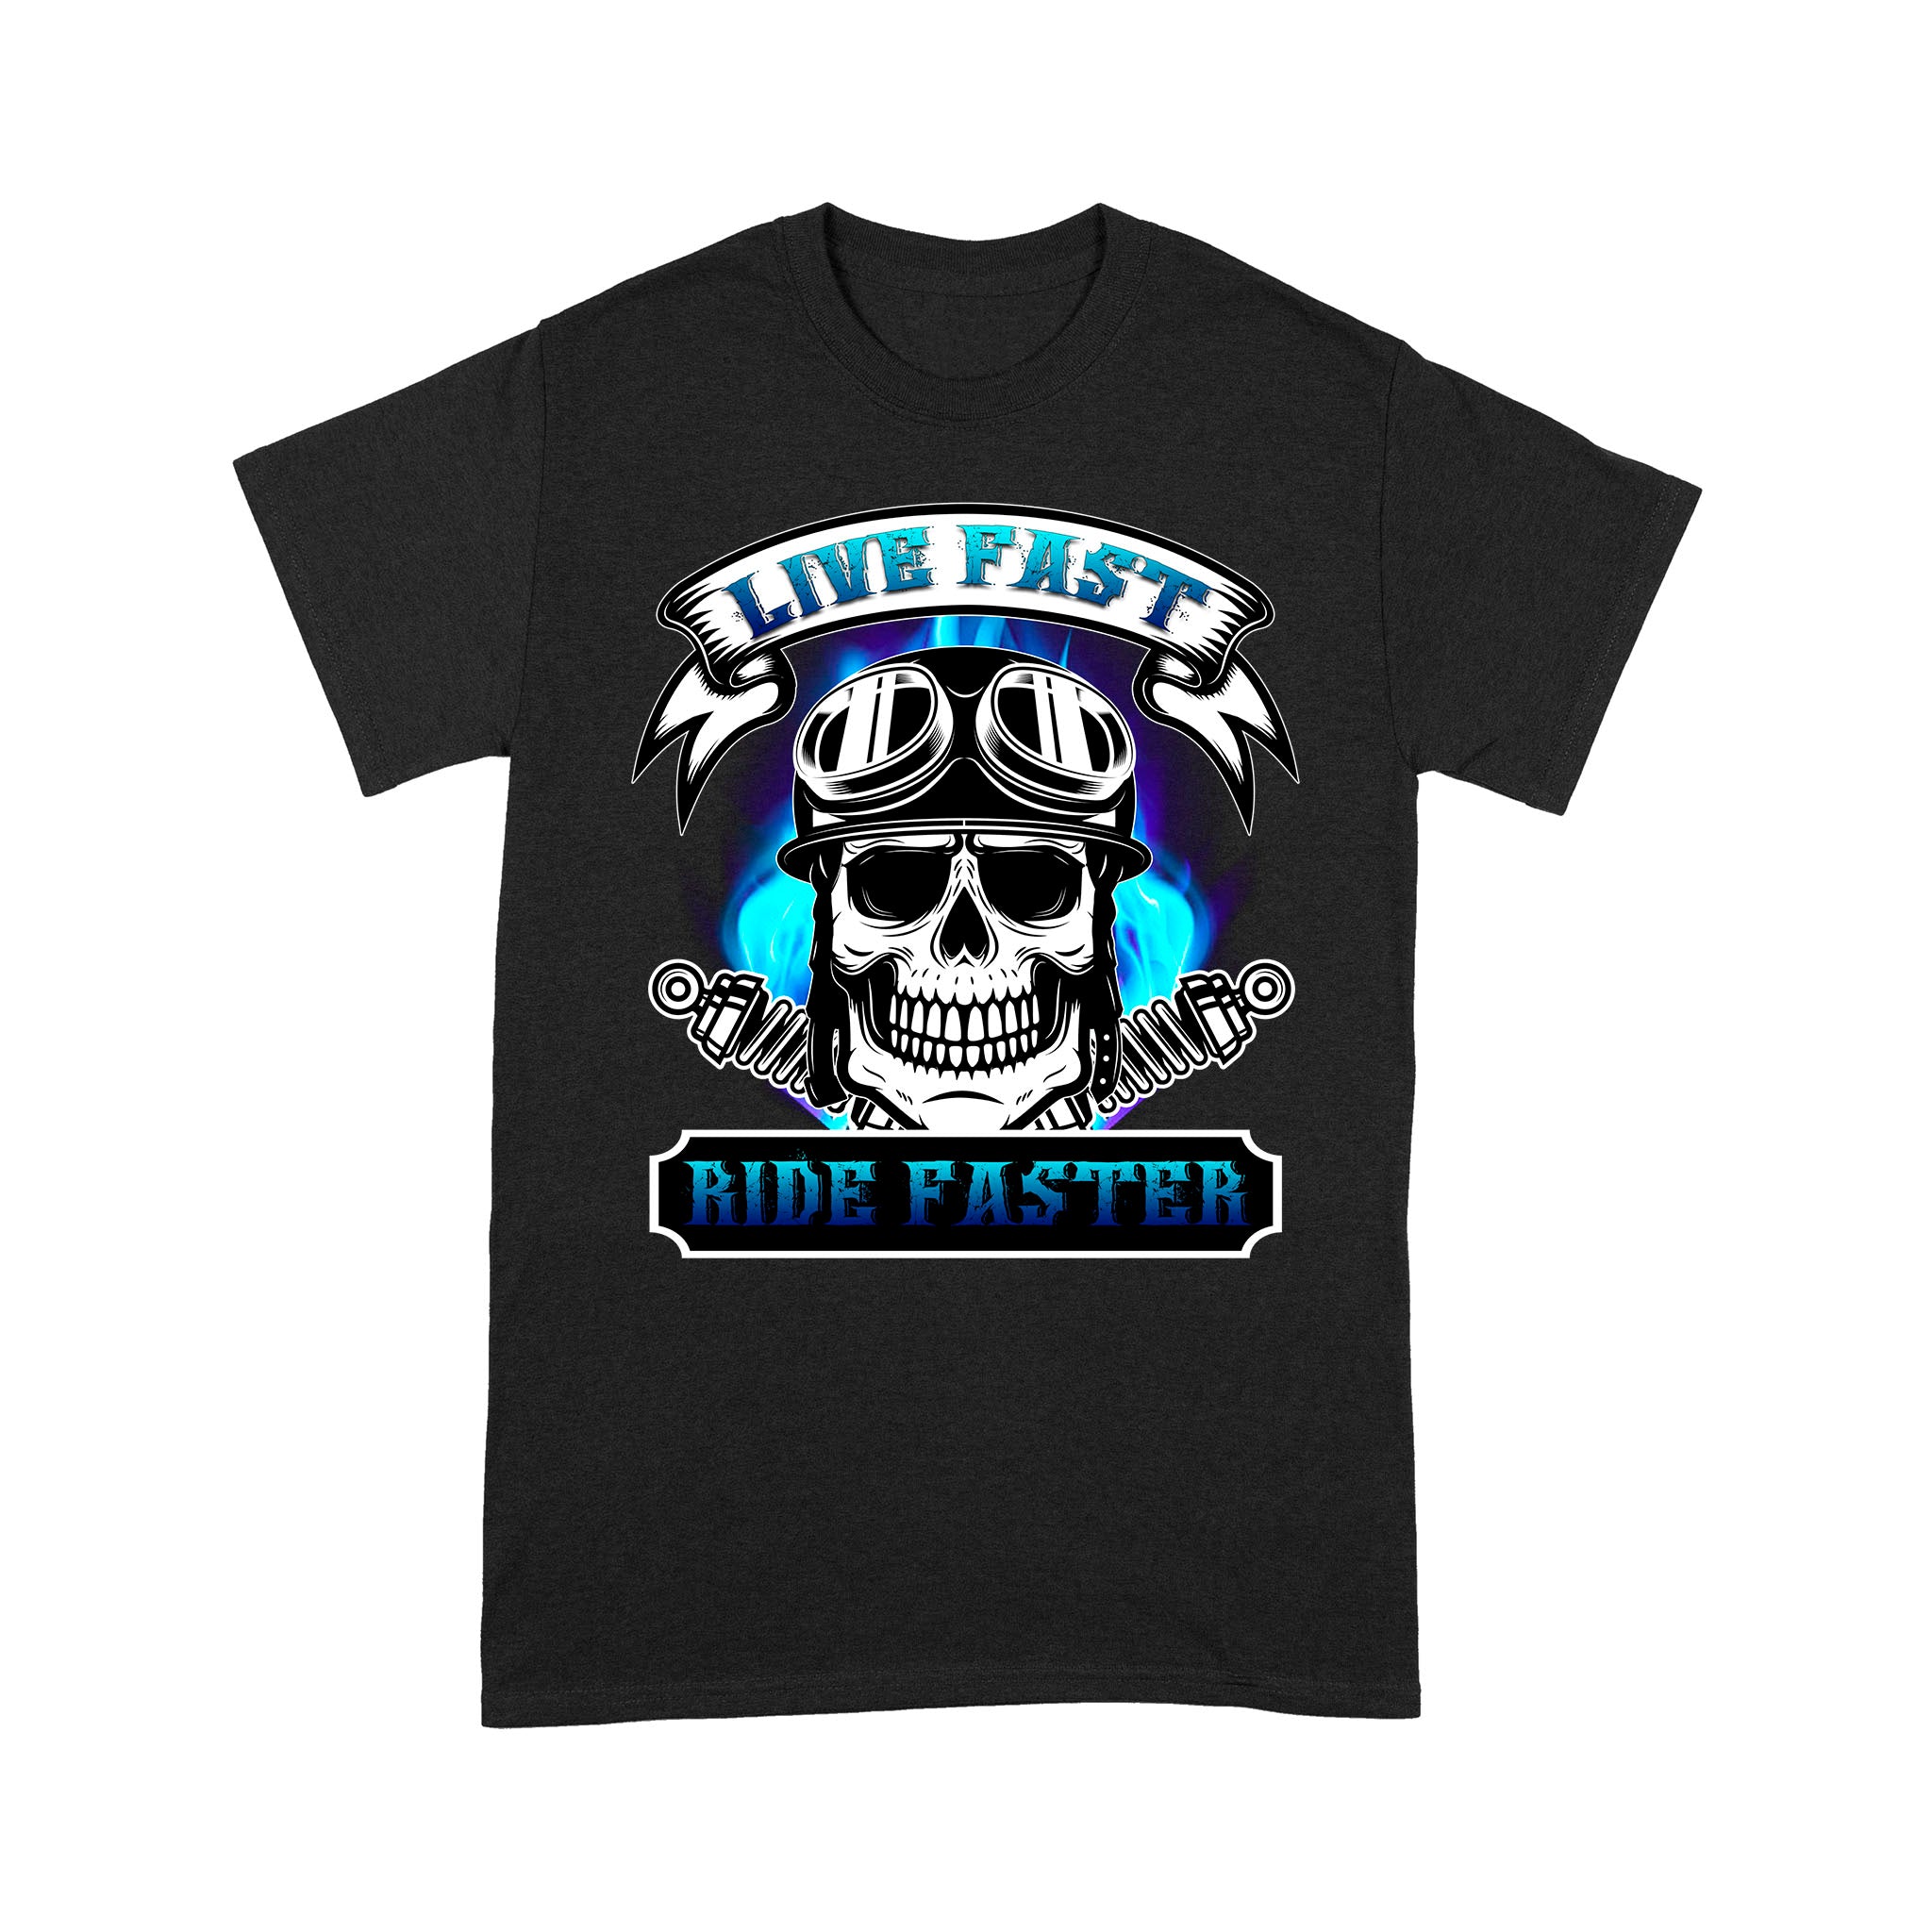 Motocycle Men T-shirt - Live Fast Ride Faster, Cool Skull Riding Tee Motocross Off-road Racing Shirt| NMS128 A01